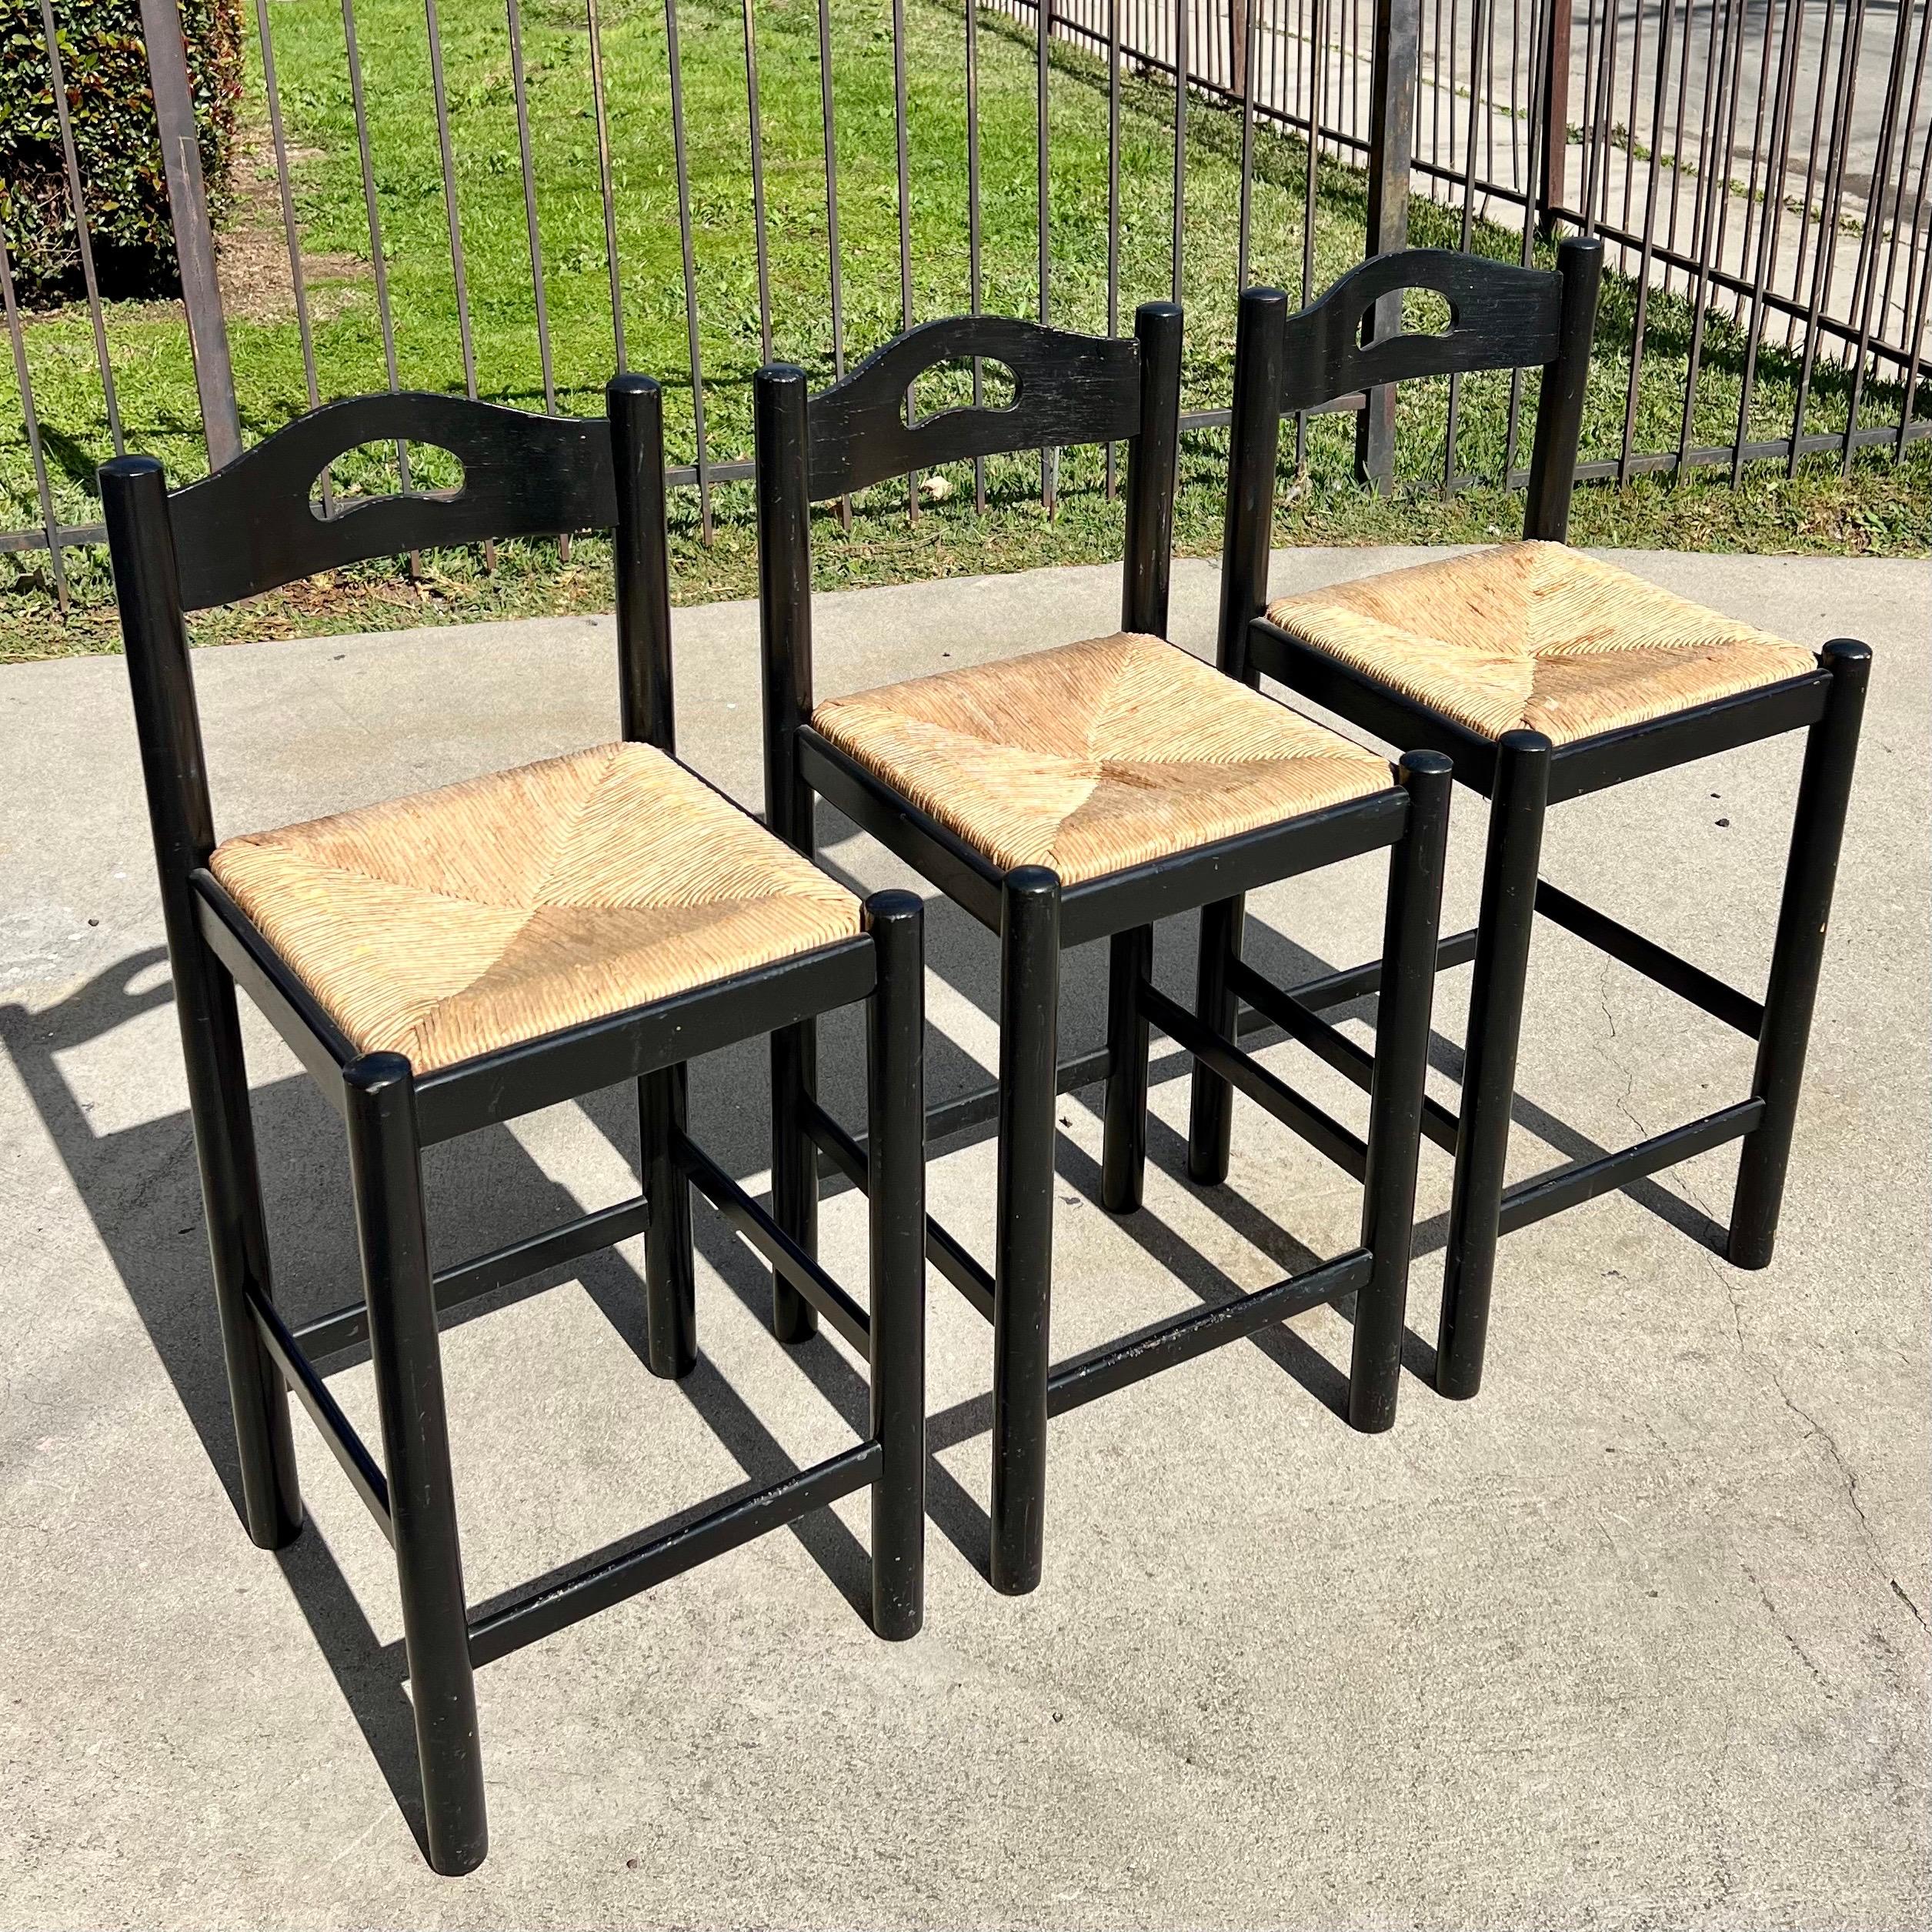 A set of vintage (c. 1990s) rush seat counter height stools in the manner of Hank Lowenstein’s Padova design. No markings. Black lacquer frames withs rush seats. Some cosmetic wear to seats and frames consistent with age and use. Please see detailed